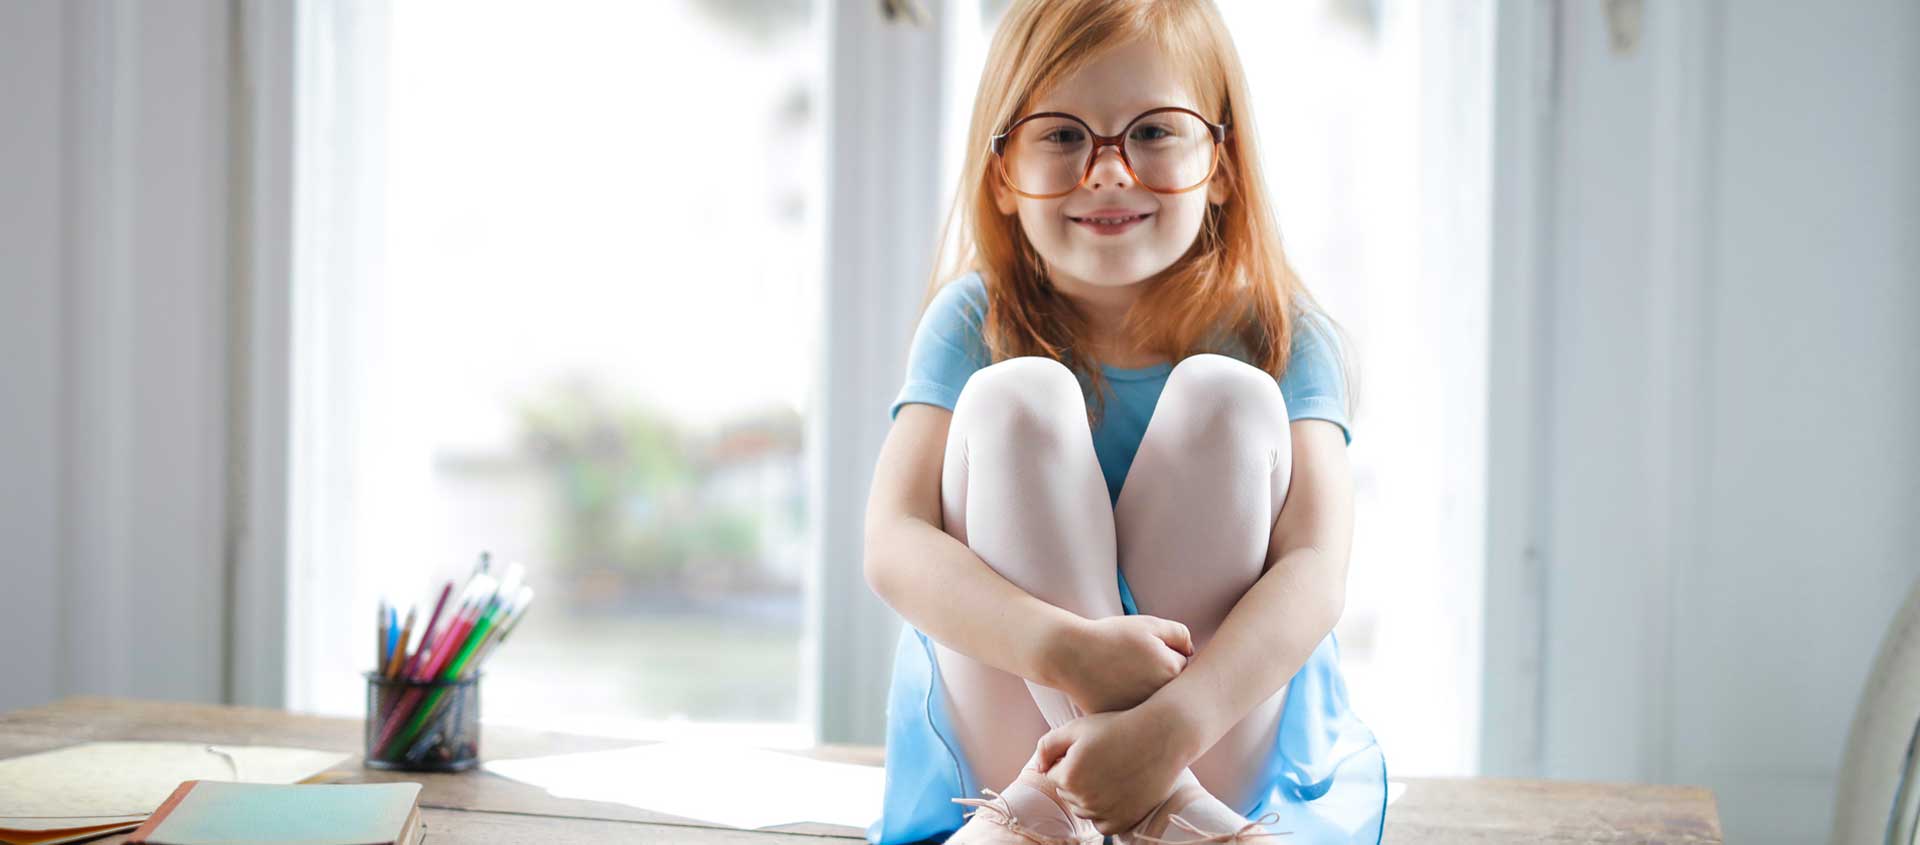 A smiling girl with red hair and glasses sits atop a desk.